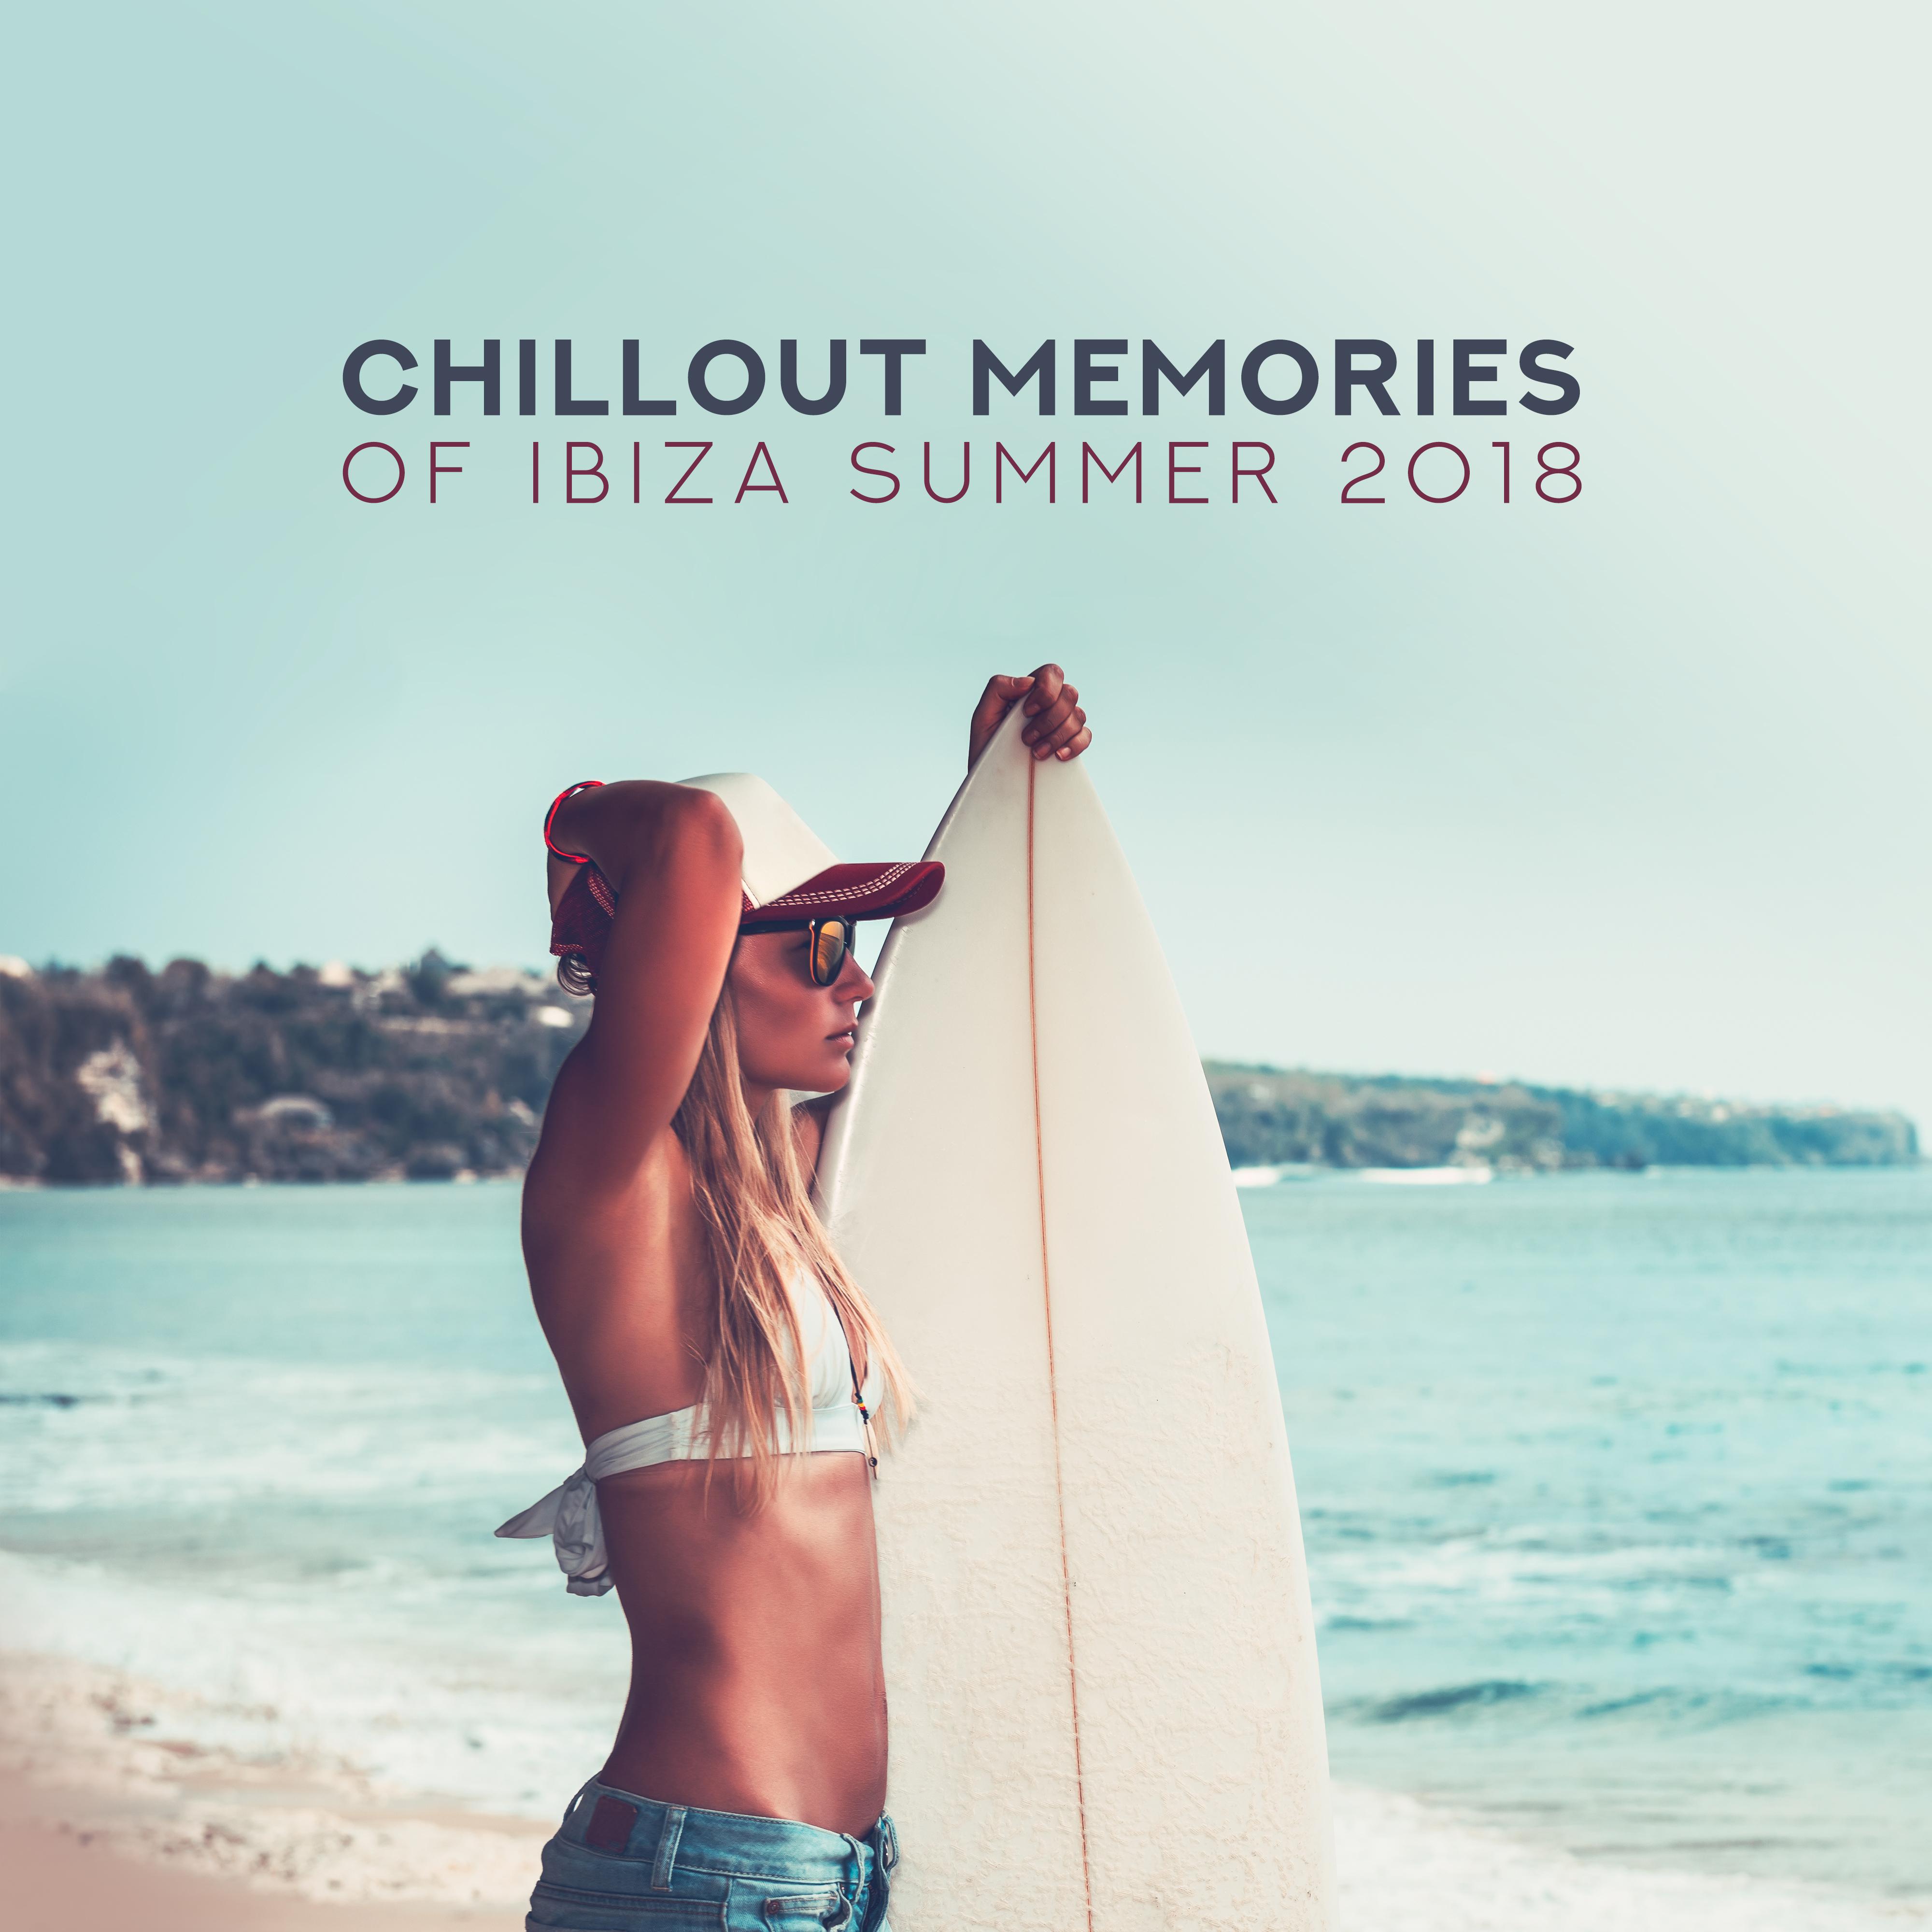 Chillout Memories of Ibiza Summer 2018